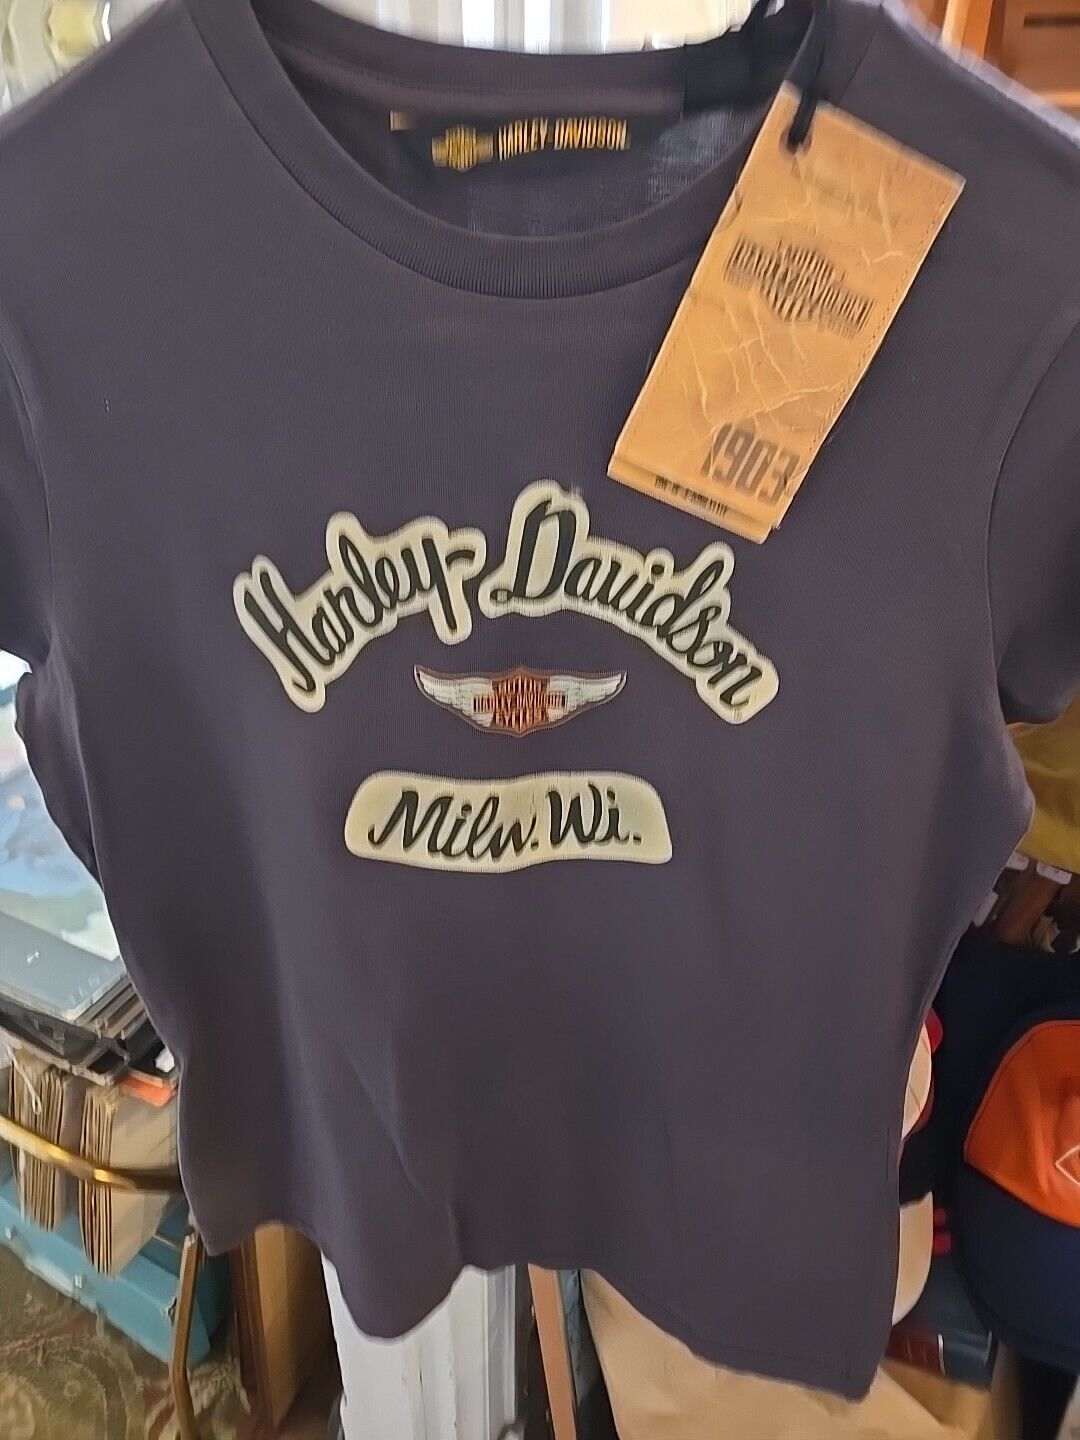 Ladies Harley Davidson Shirt With Attached Tags